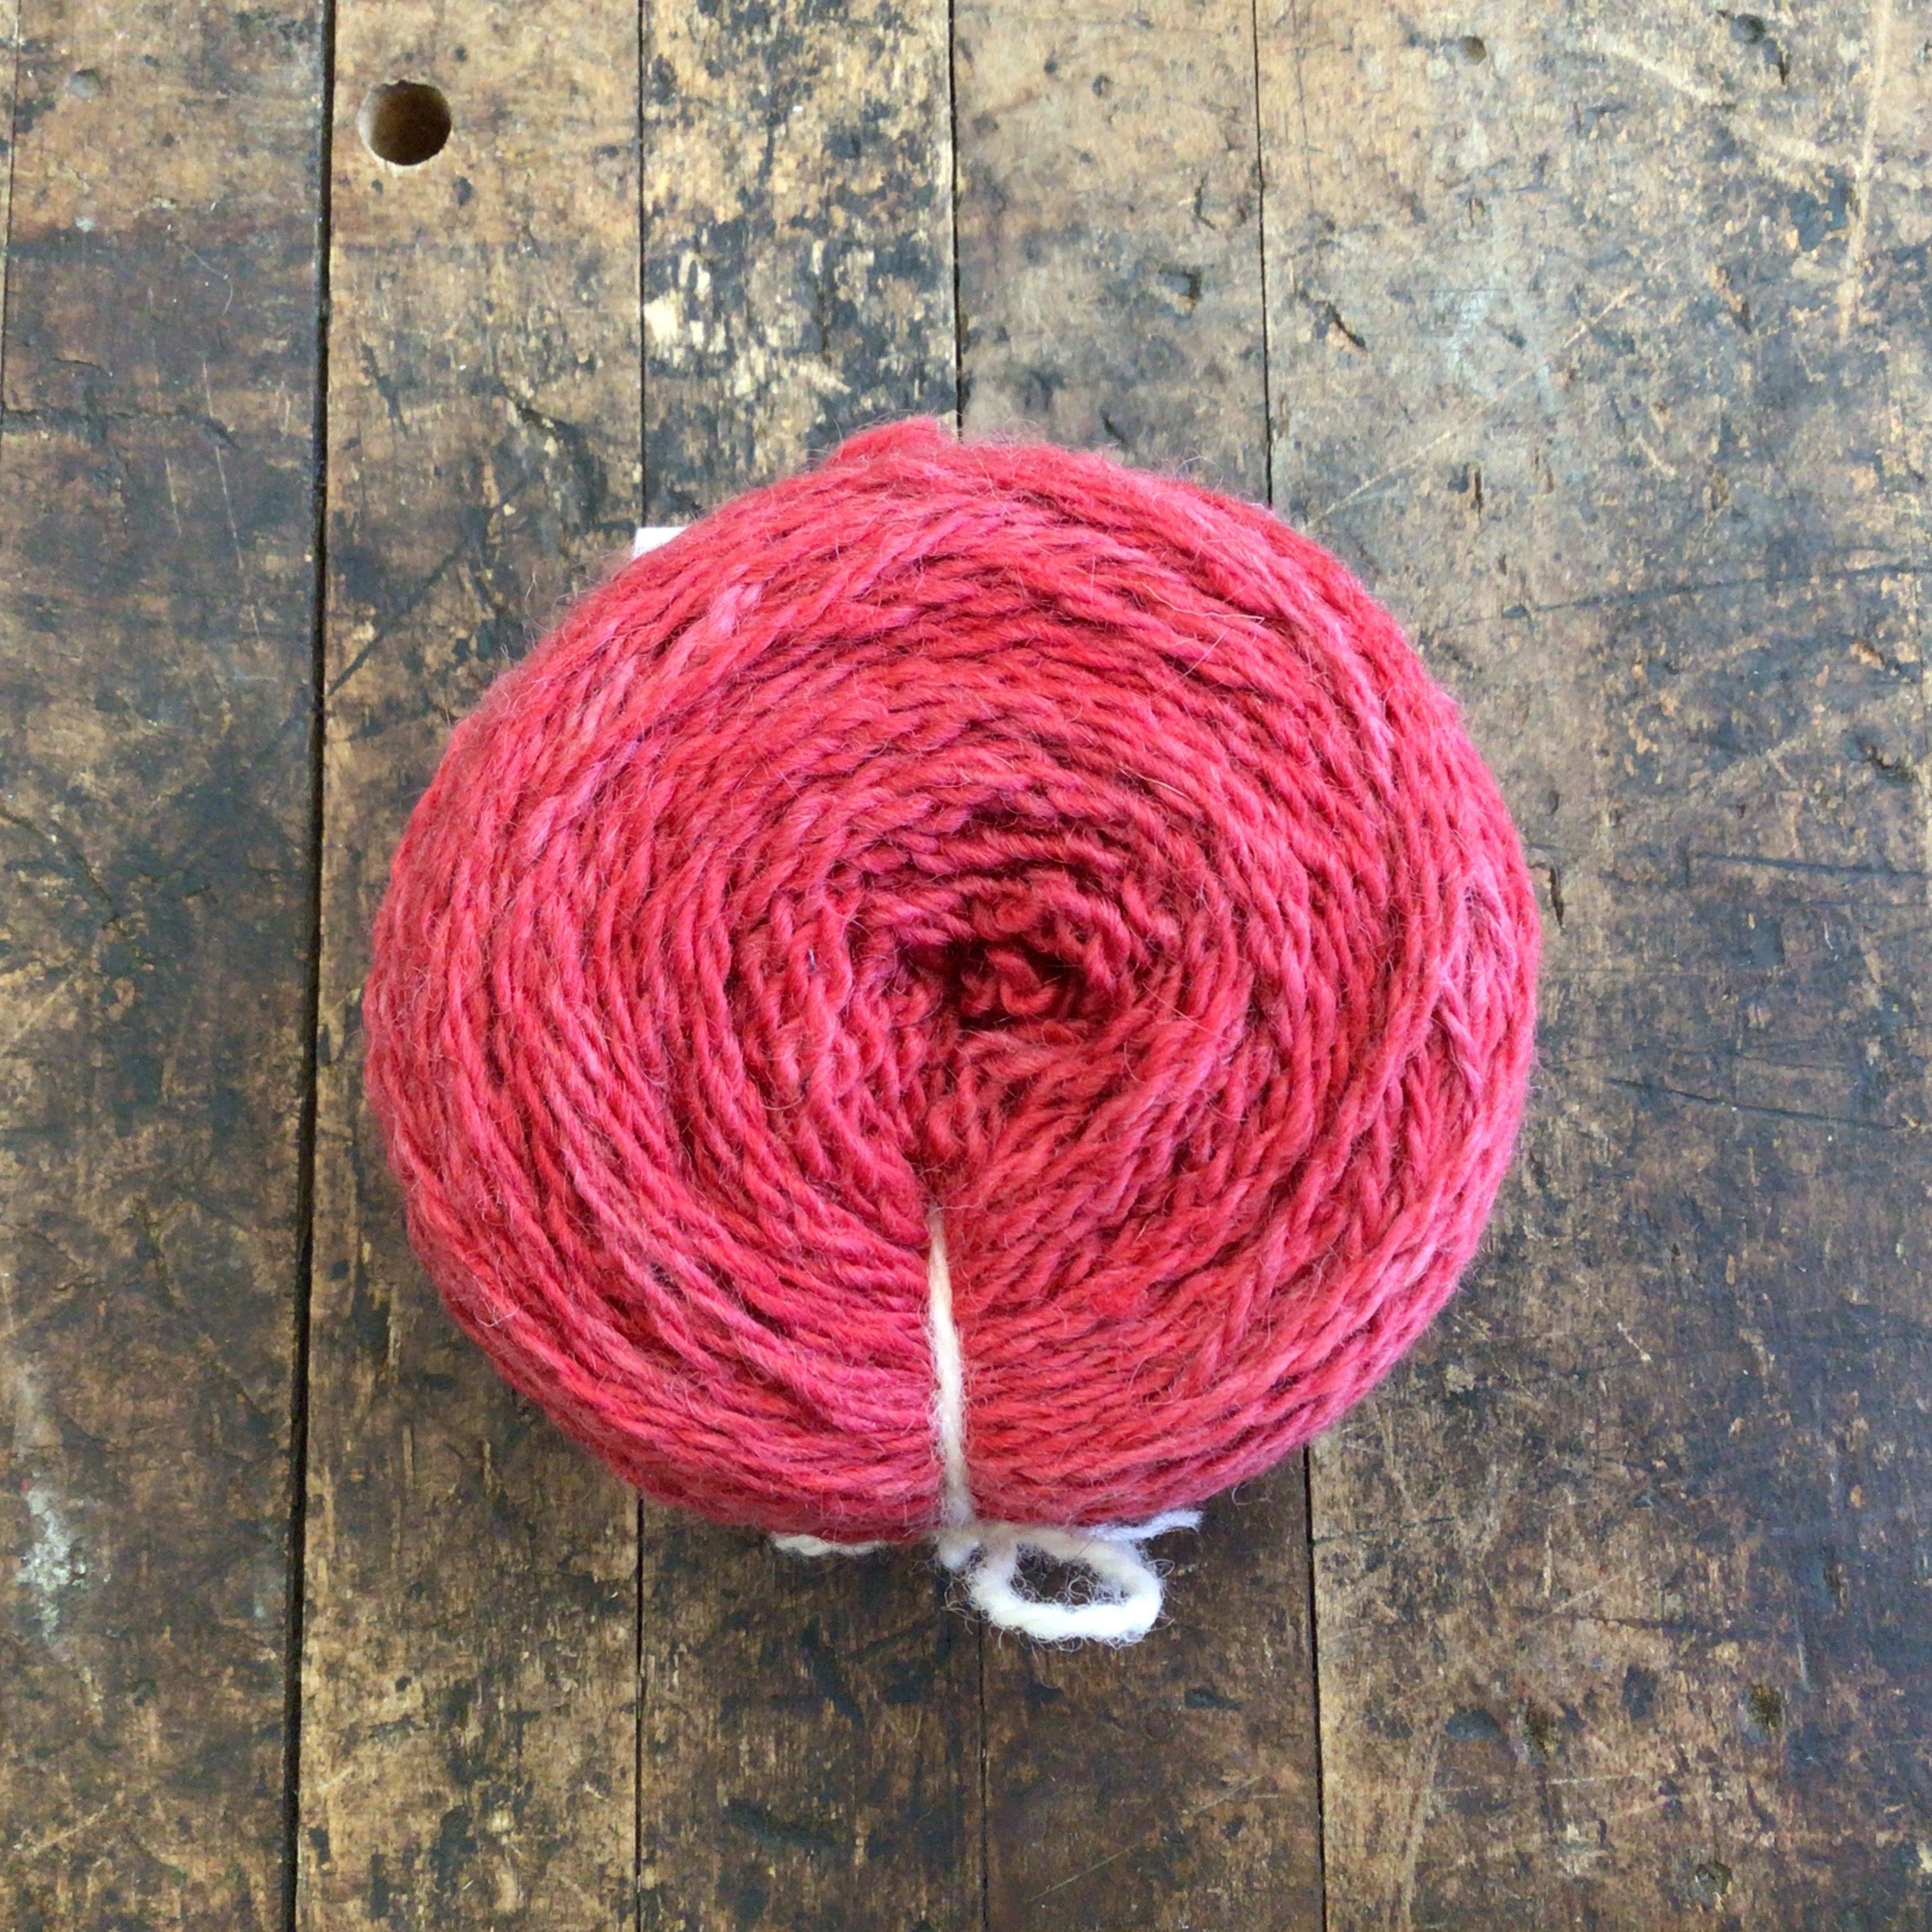 Tronstad Ranch Rambouillet 2 Ply Worsted Weight Yarn - Fire Engine Red